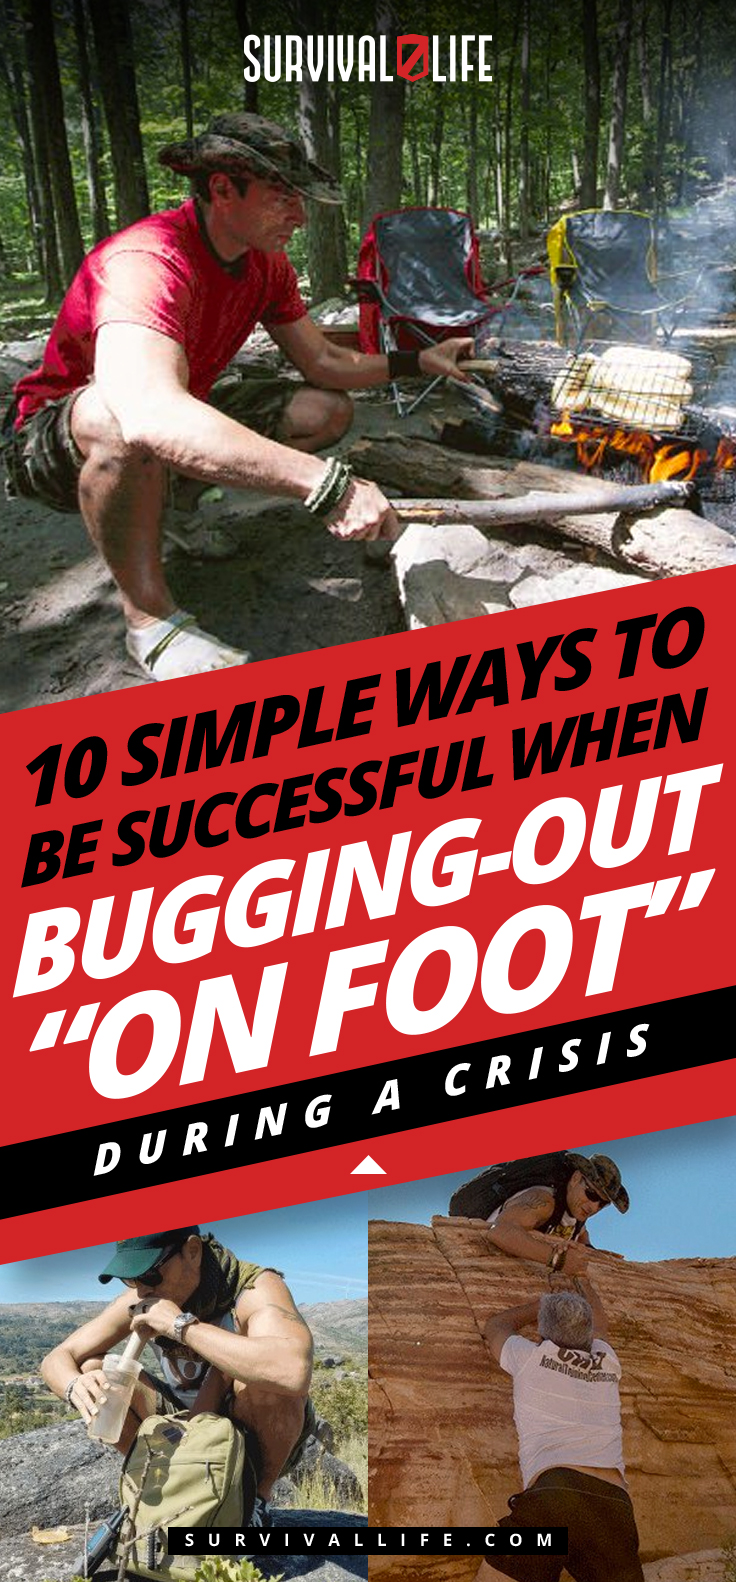 10 Simple Ways To Be Successful When Bugging-Out "On Foot" During A Crisis